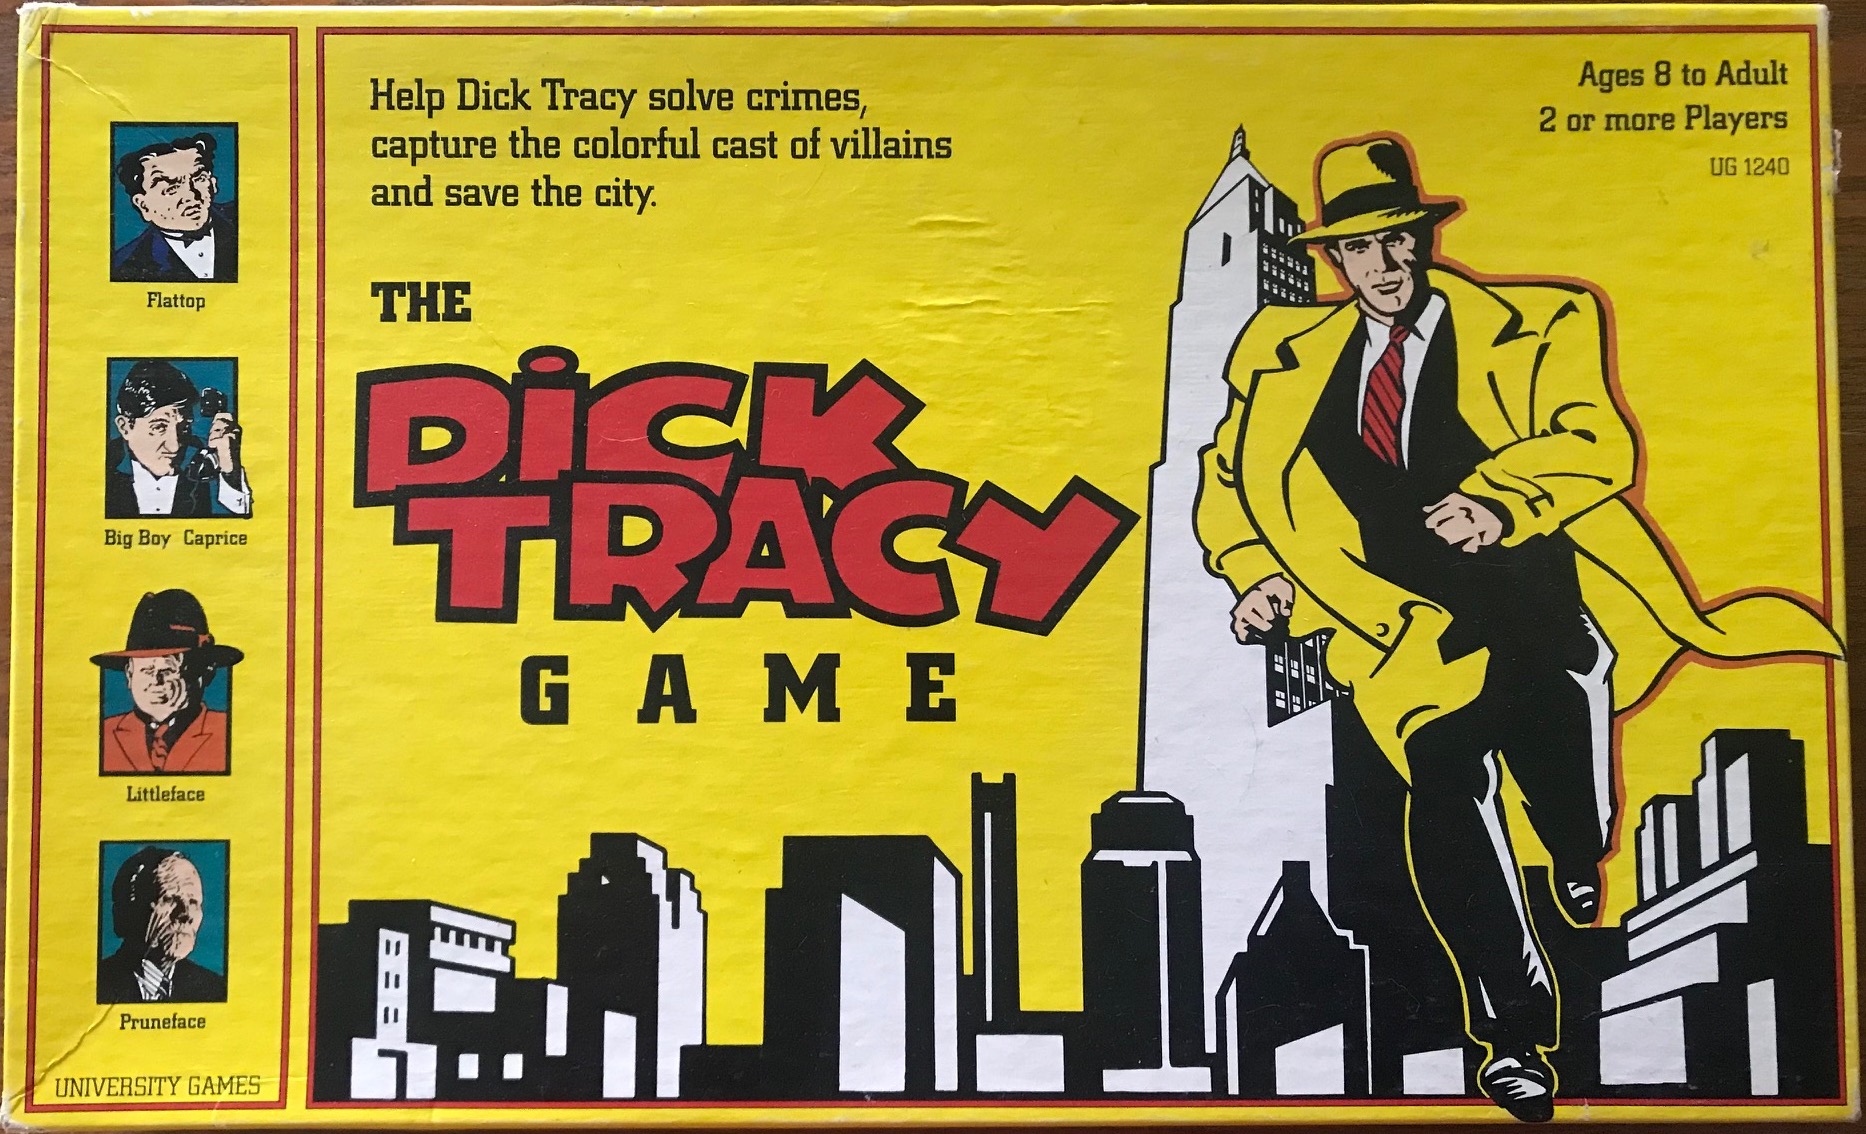 Dick tracy pic